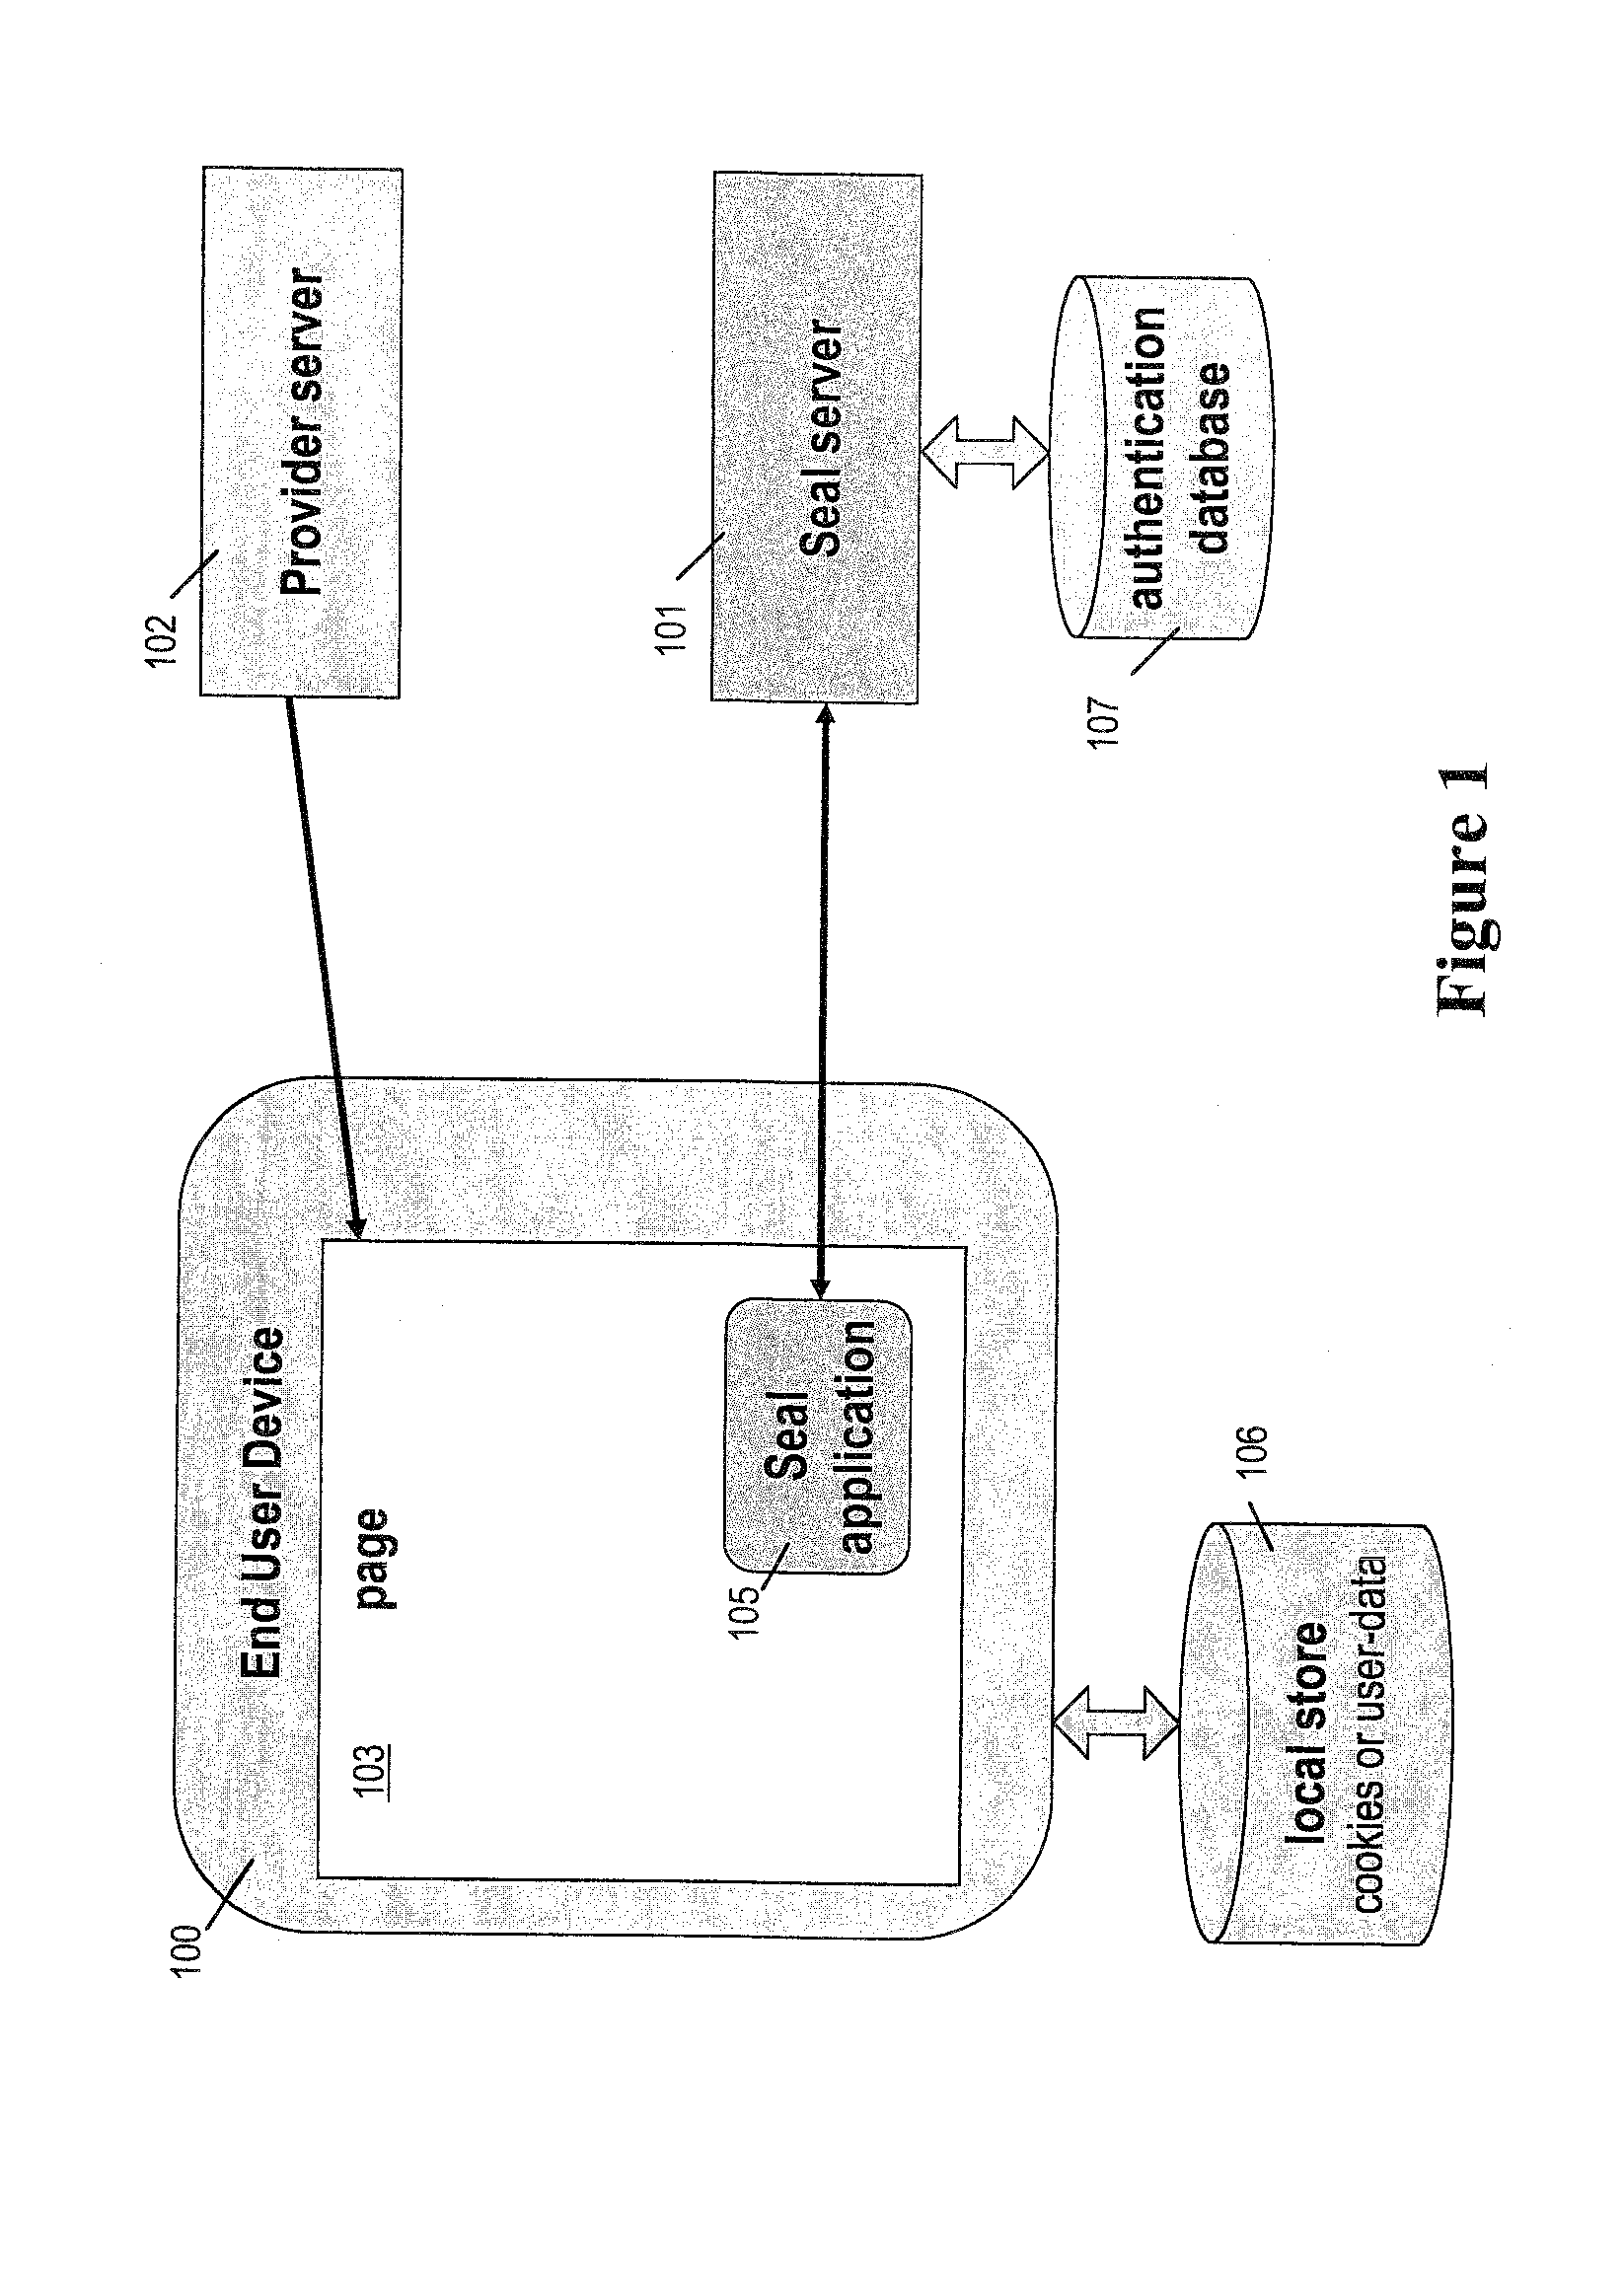 System and method for verifying networked sites